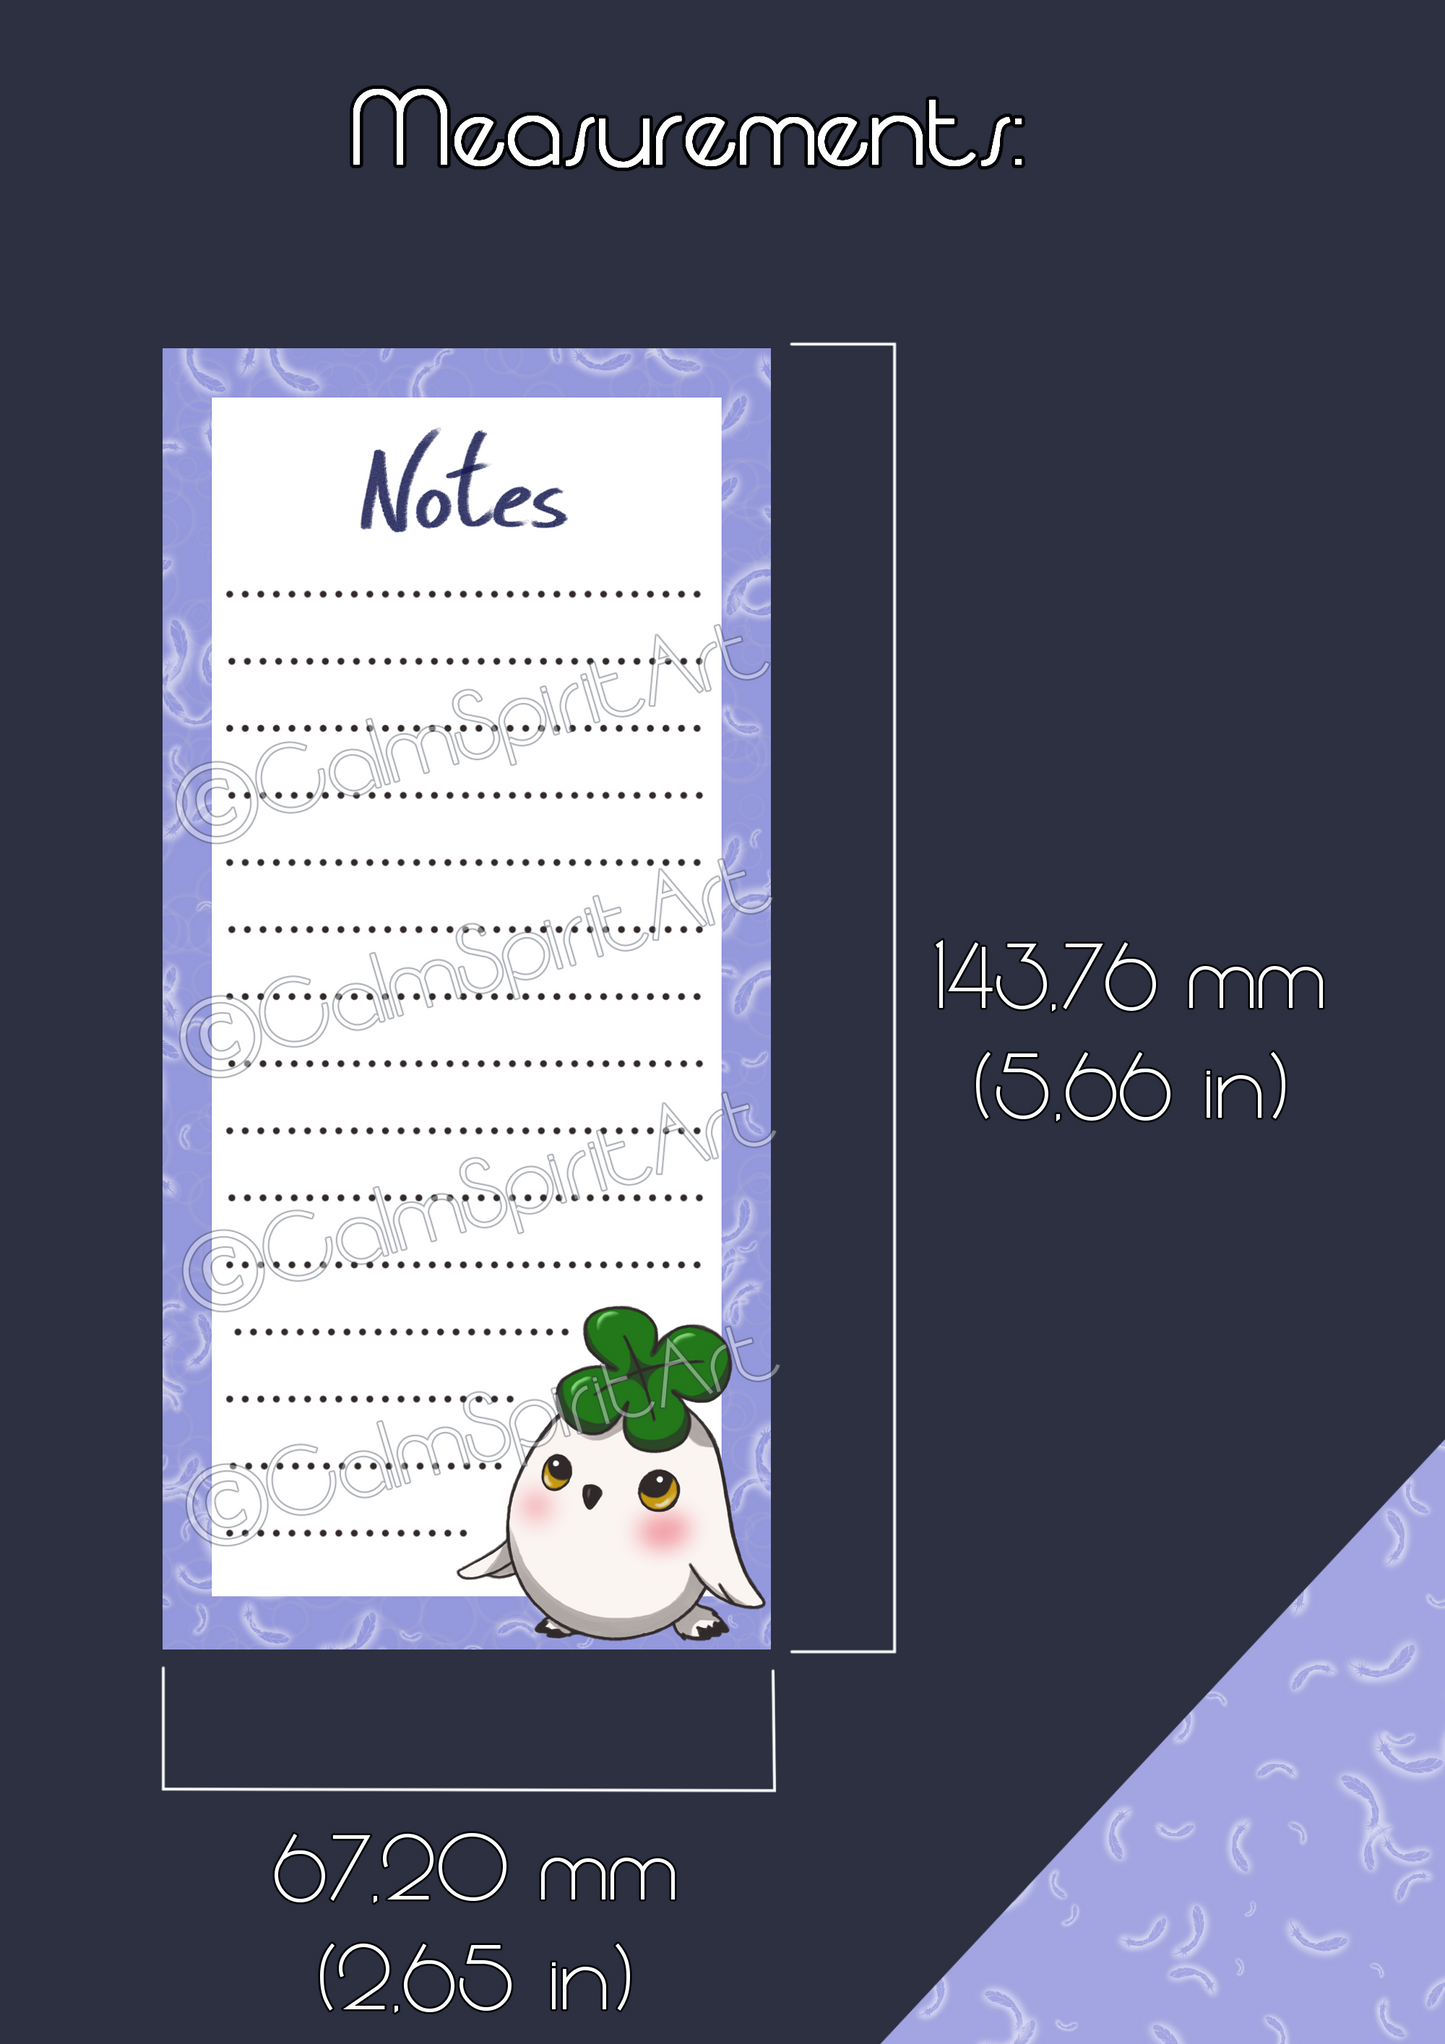 Instant download: Notepad design 5-pack "Clover Friends" incl. tutorial